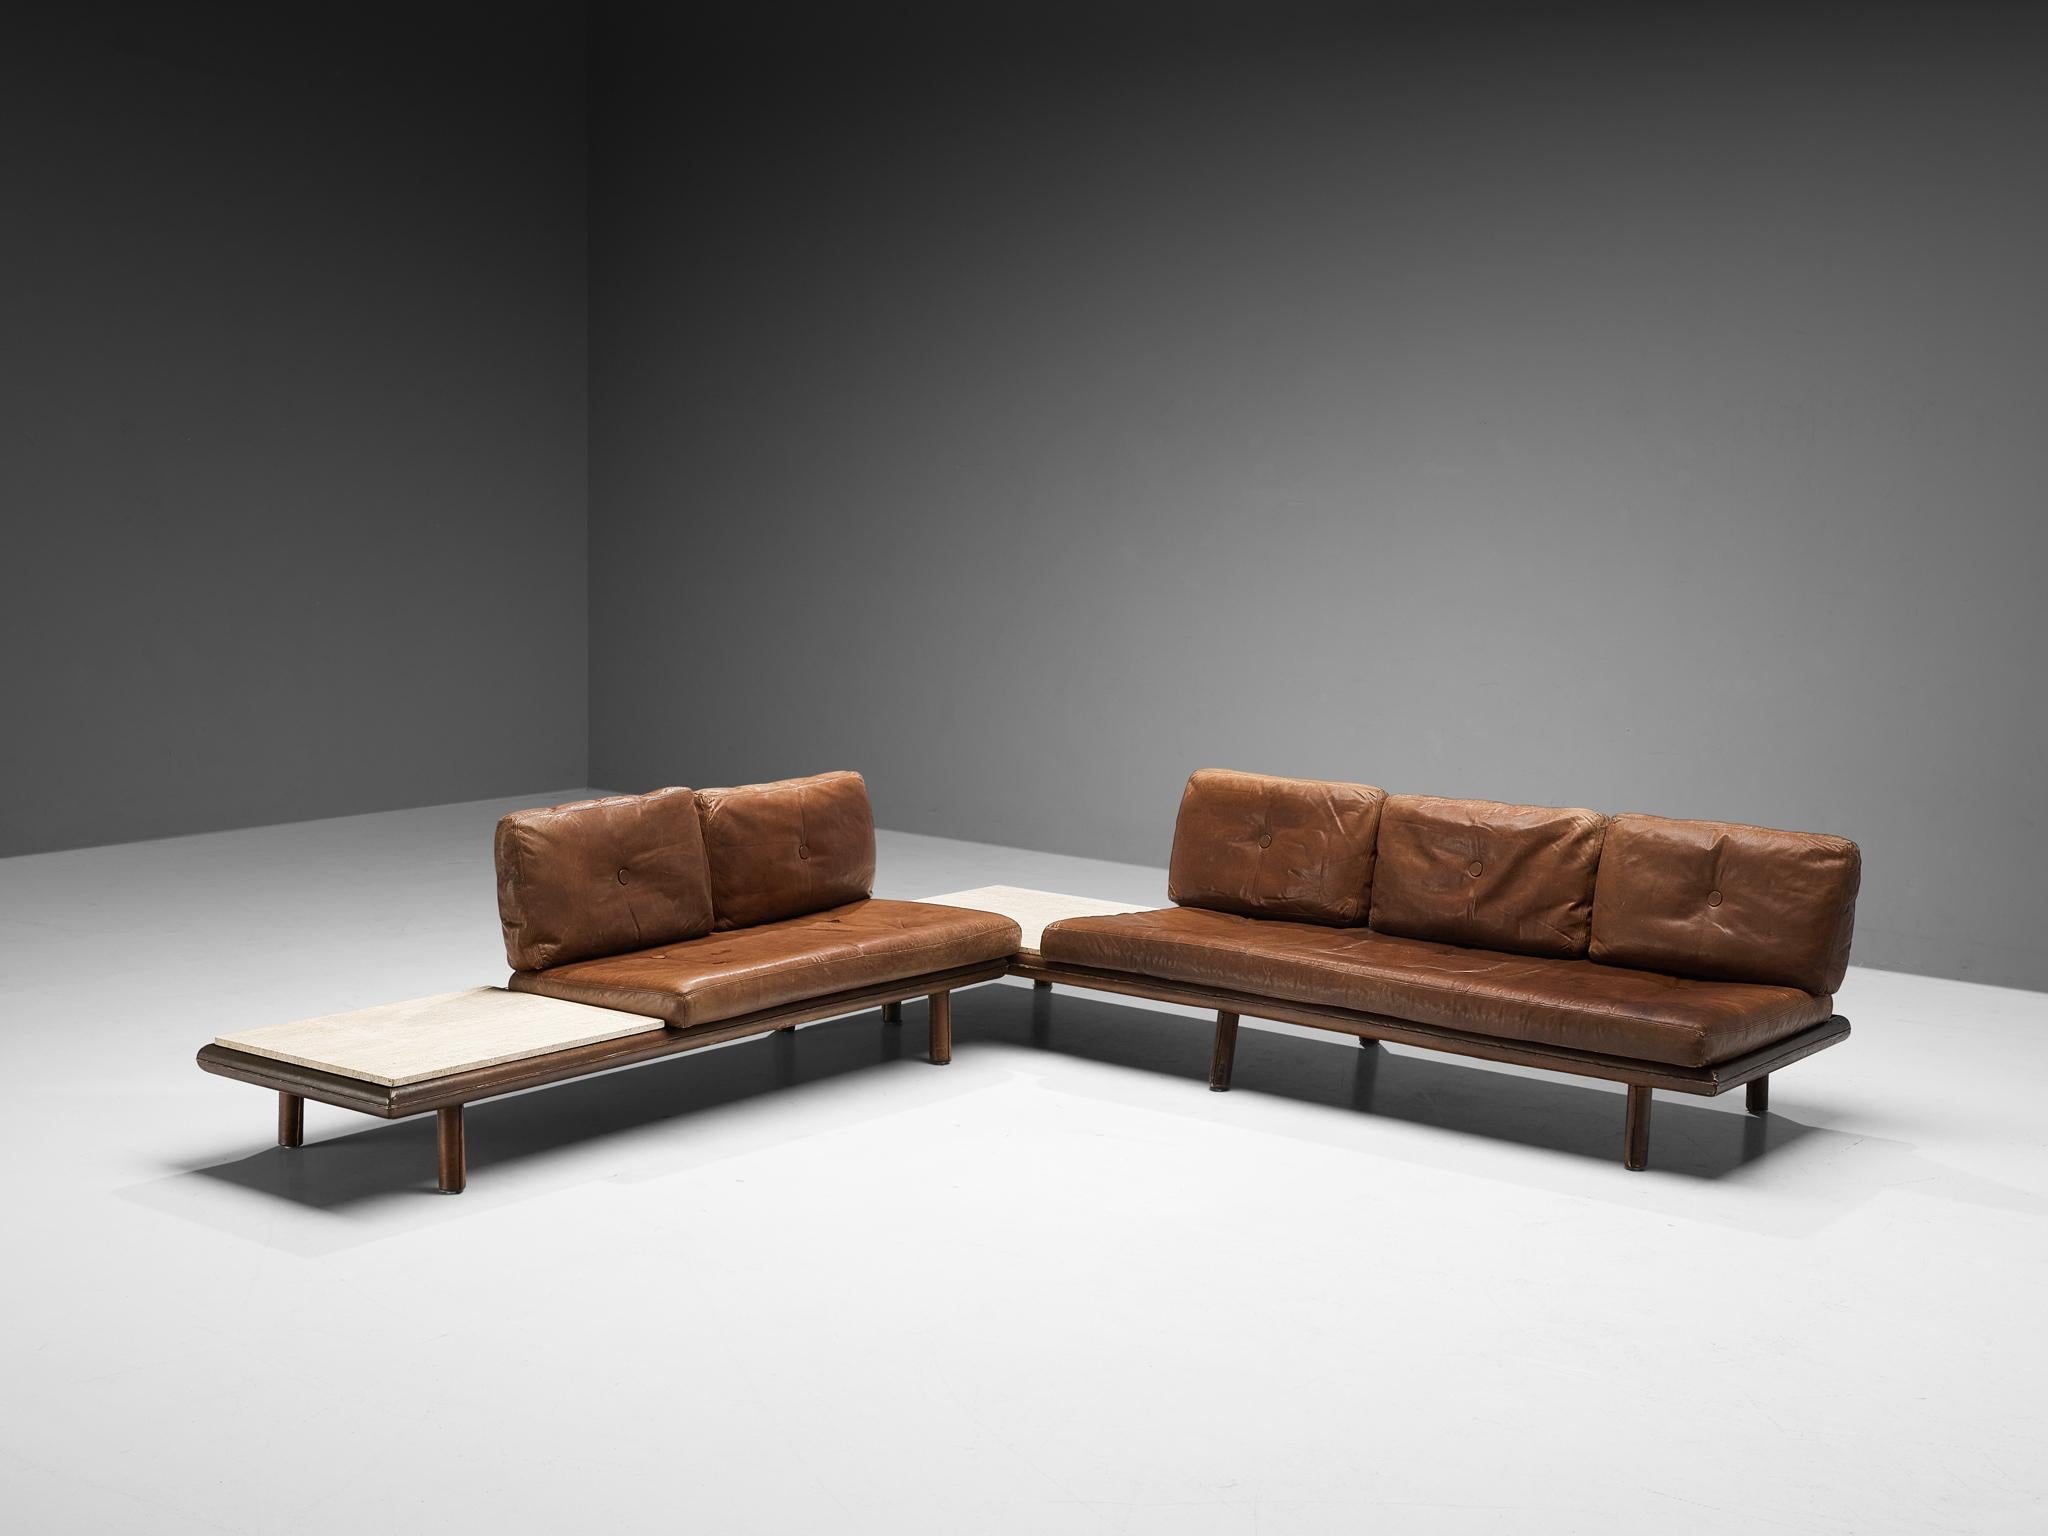 Franz Köttgen for Kill International, sofa elements, leather, wood, travertine, Germany, 1960s

A nice seating group consisting of two sofas or day beds. Designed by Franz Köttgen for Kill International in the 1960s. In this nice set there are a